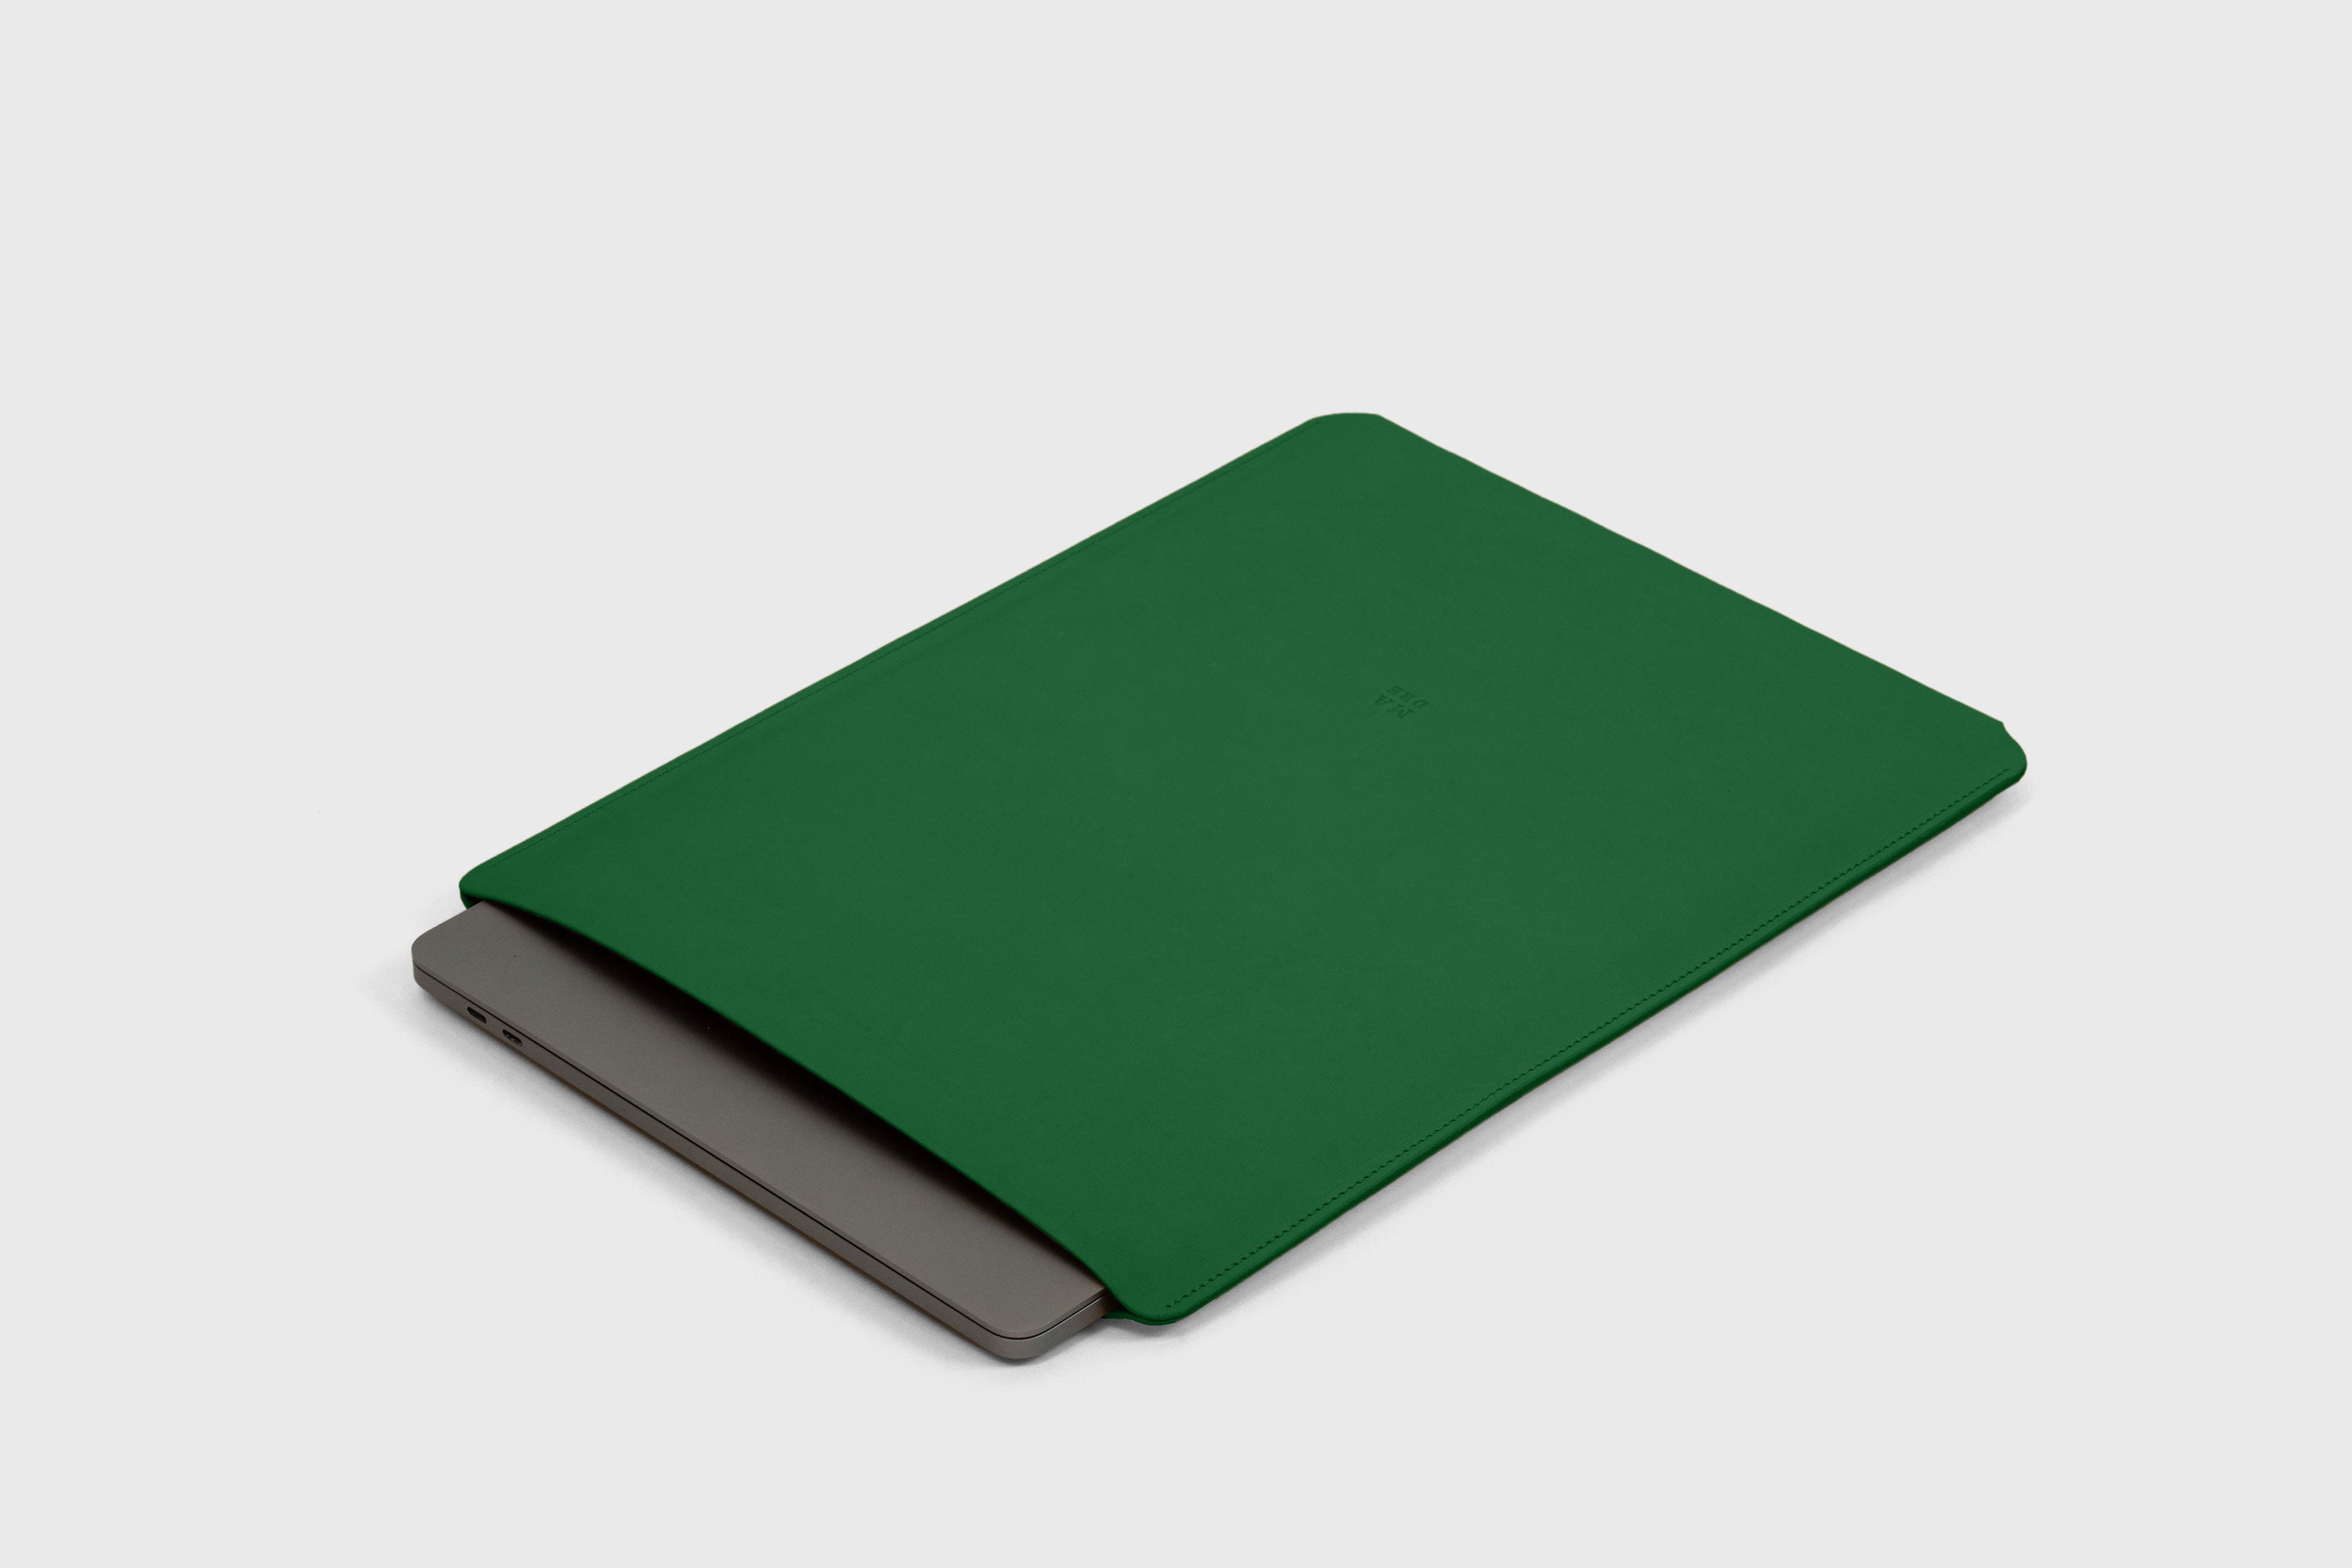 MacBook Pro Sleeve 16 Inch Leather Premium Grass Green Vegetable Tanned Leather Minimalistic Design By Manuel Dreesmann Atelier Madre Barcelona Spain